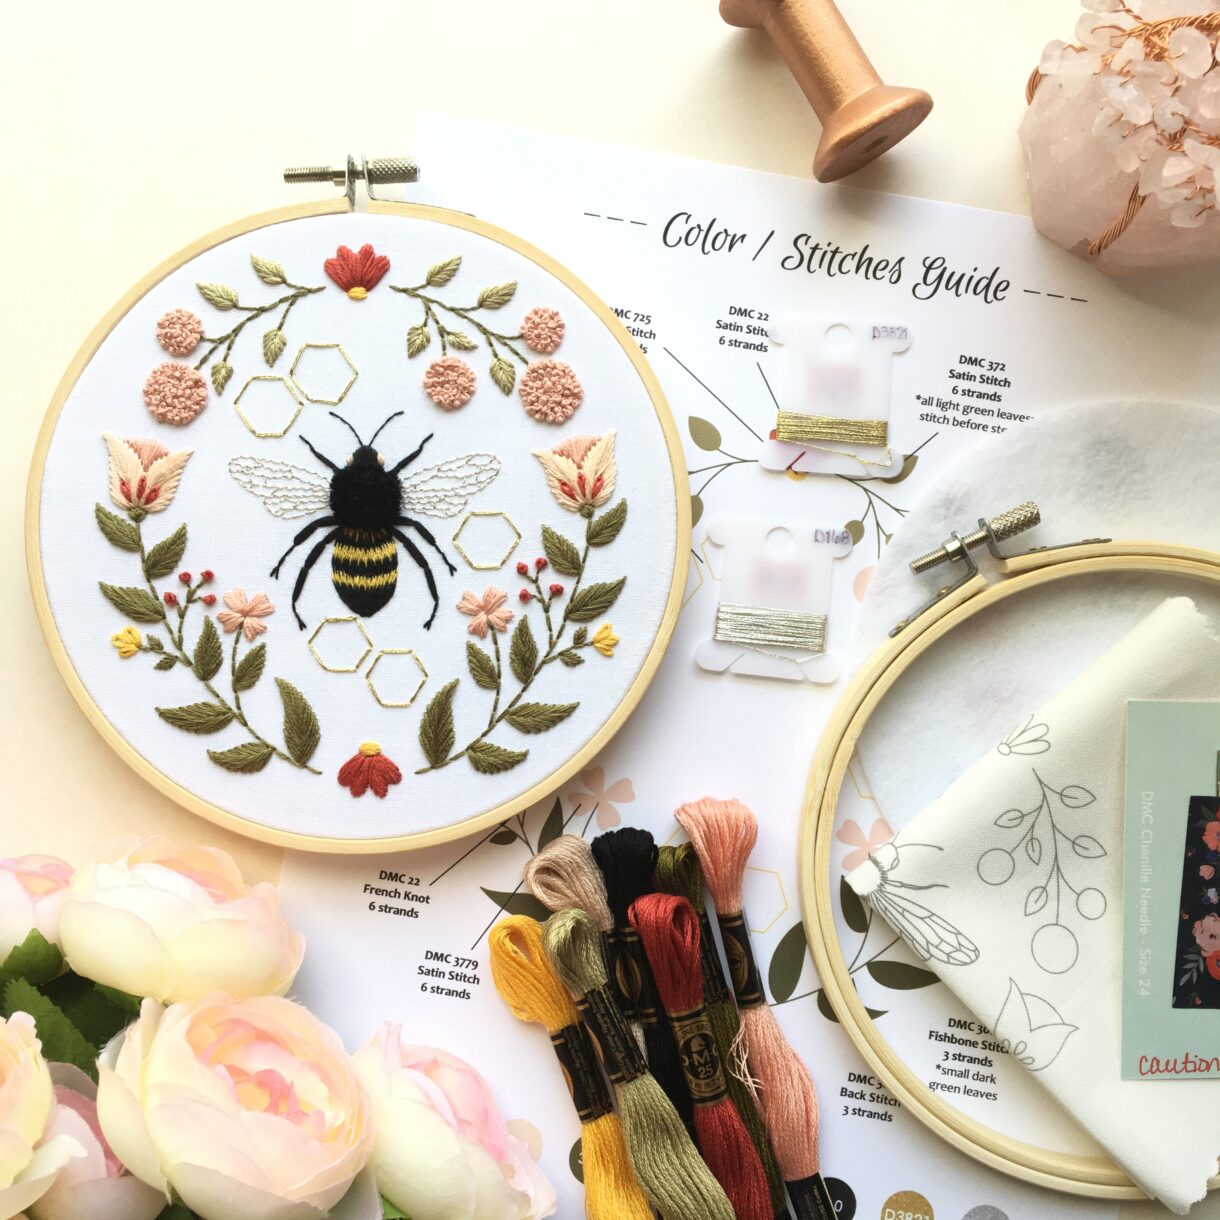 picture of the supplies that are included in the Honeybee Motif embroidery kit